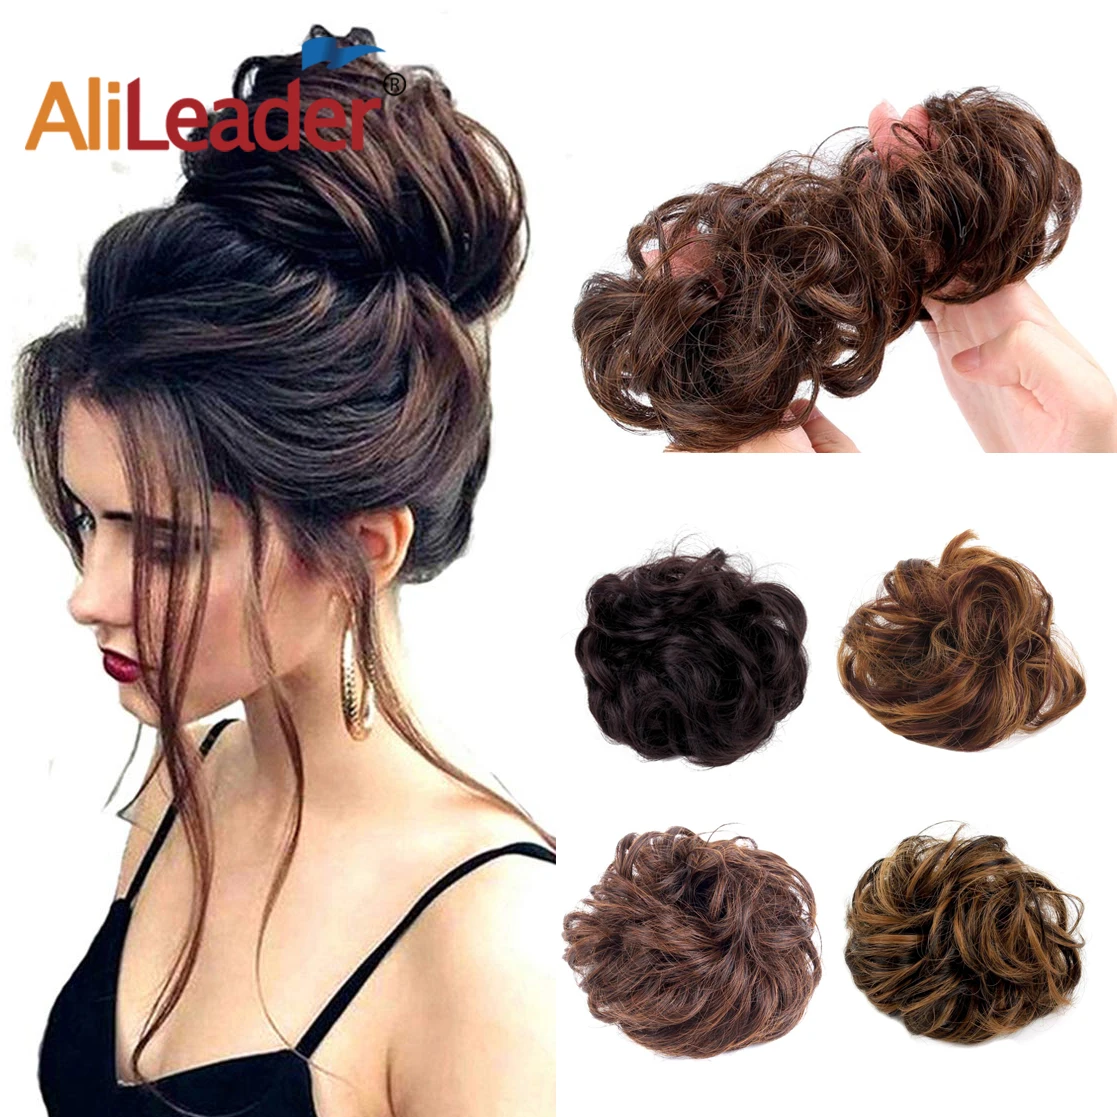 

Alileader Messy Hair Bun Extensions Curly Hair Synthetic Hair Chignons Rope Piece Elastic Band Donut Updo Ponytail, 10 colors